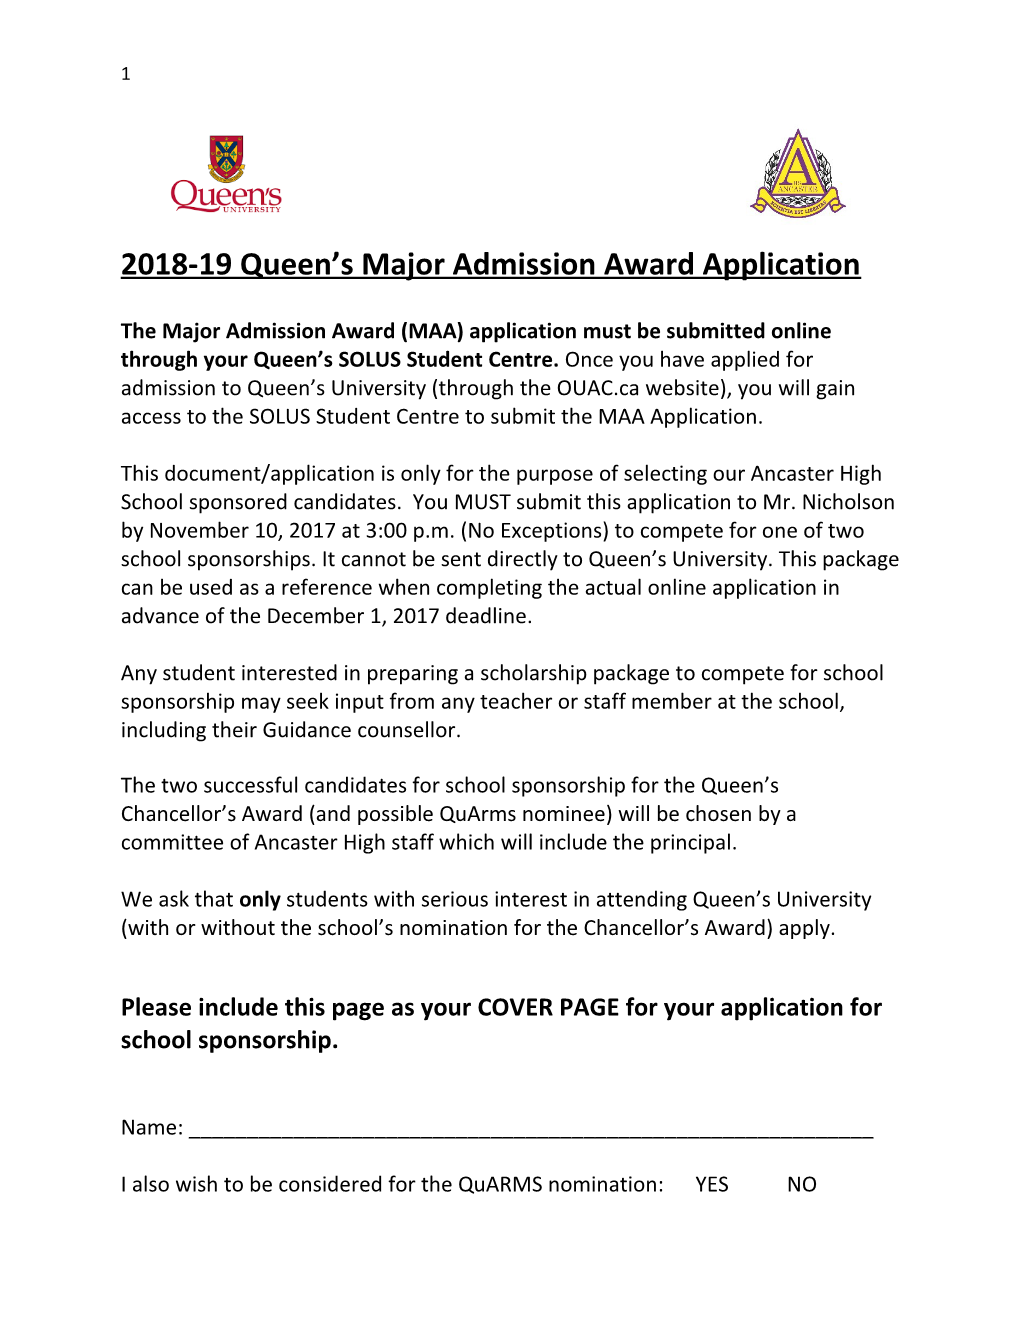 2018-19 Queen S Major Admission Award Application